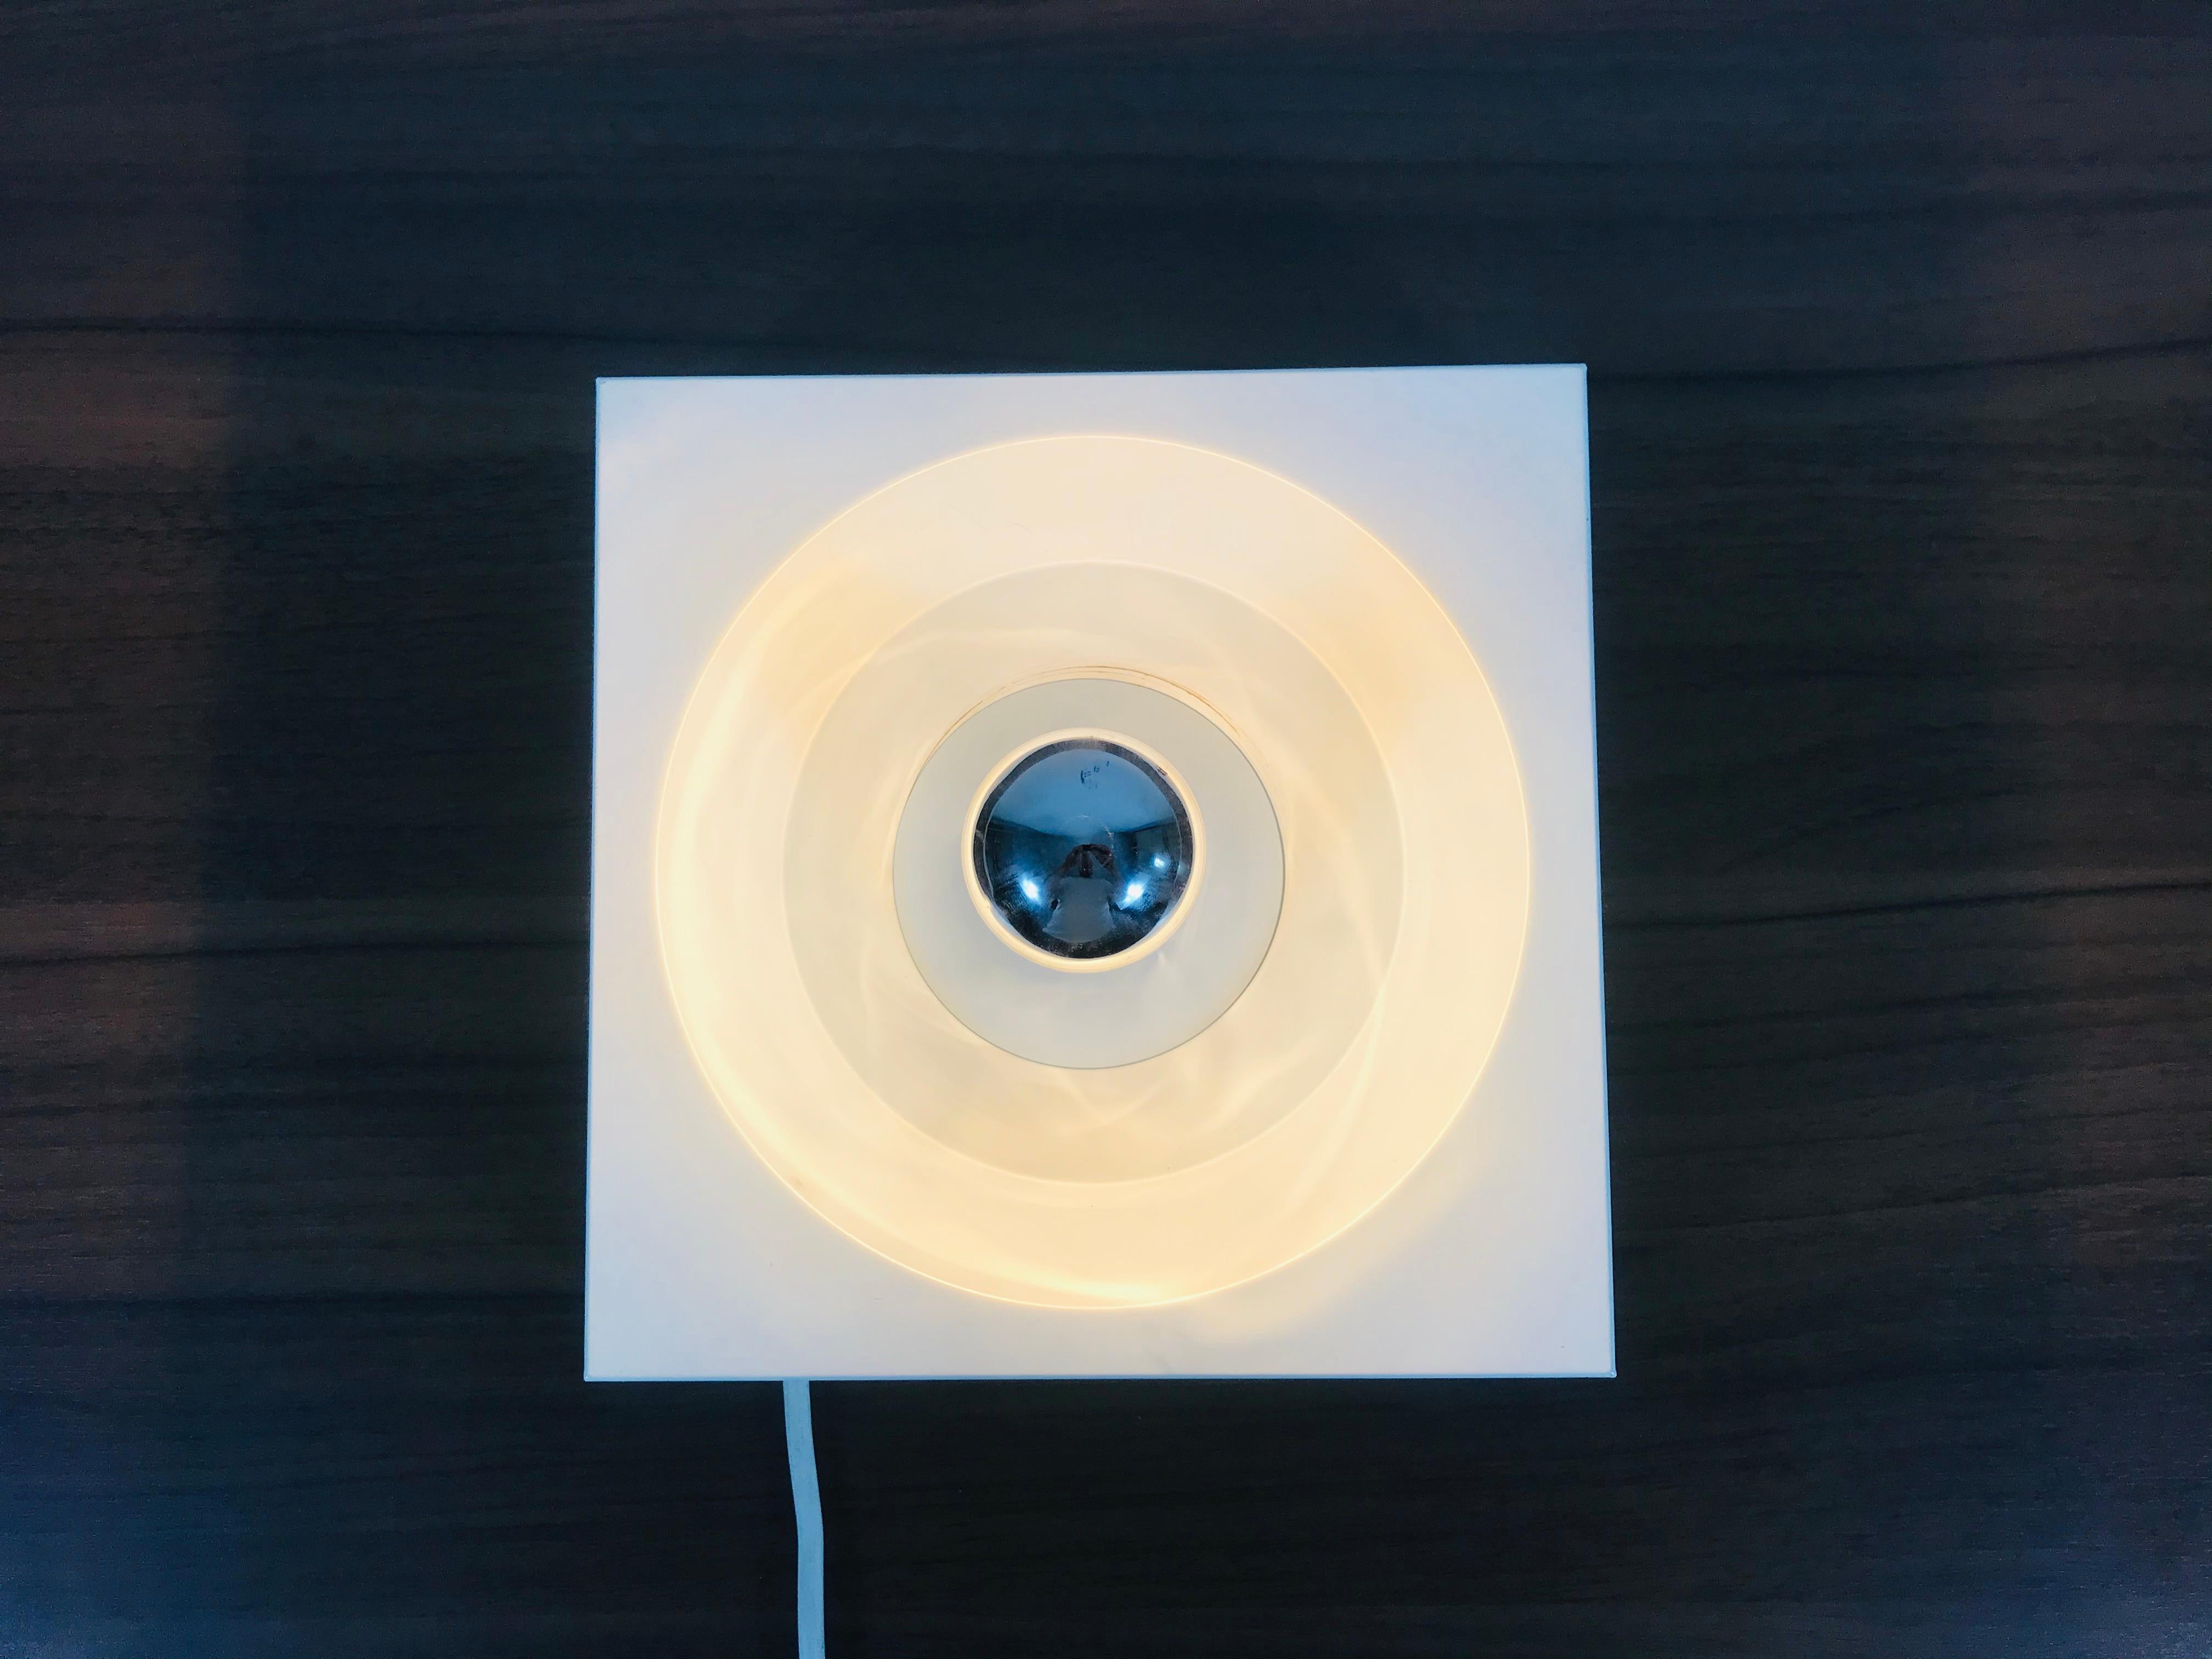 A Space Age flush mount or wall lamp by Kaiser made in Germany in the 1970s. It was designed by Klaus Hempel. The body of the lamp is made of full metal and has a beautiful white color.

The light requires one E14 light bulb.